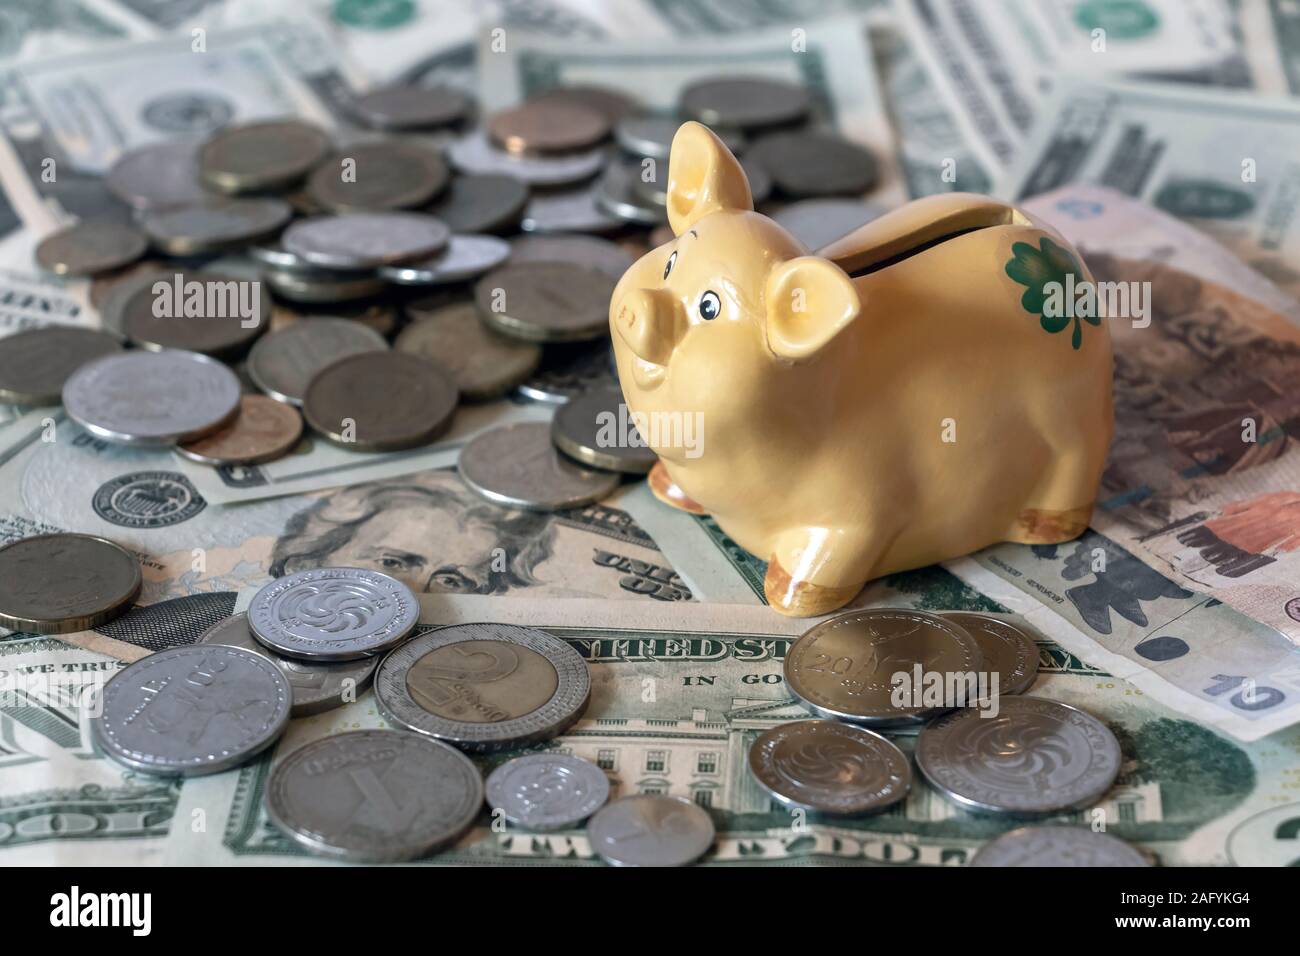 Piggy bank with georgian lari coins on the background of the american dollar usd banknote and ruble rub coins. International currency and economy conc Stock Photo